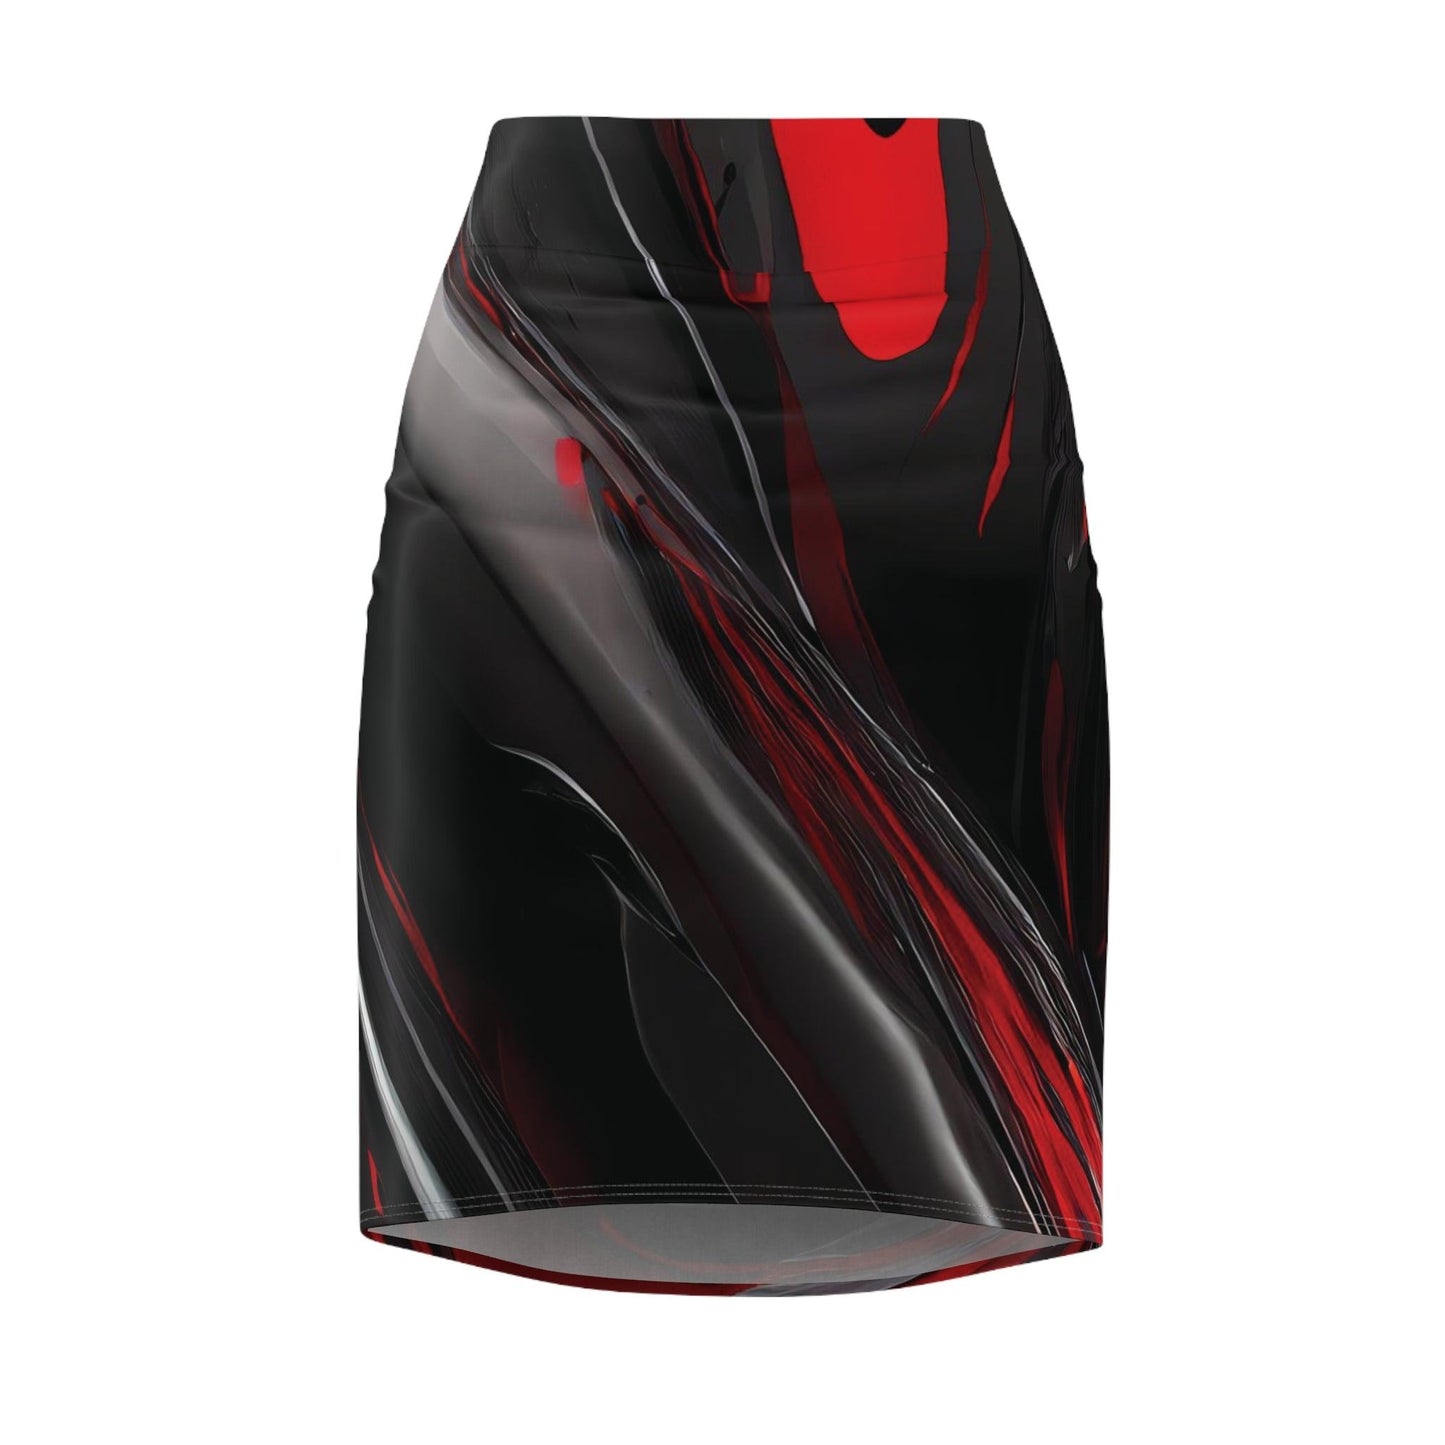 Liquid Red Bleistiftrock Bleistiftrock 74.99 All Over Print, AOP, AOP Clothing, Assembled in the USA, Assembled in USA, Bleistiftrock, Made in the USA, Made in USA, Skirts & Dresses, Sublimation, Women's Clothing JLR Design